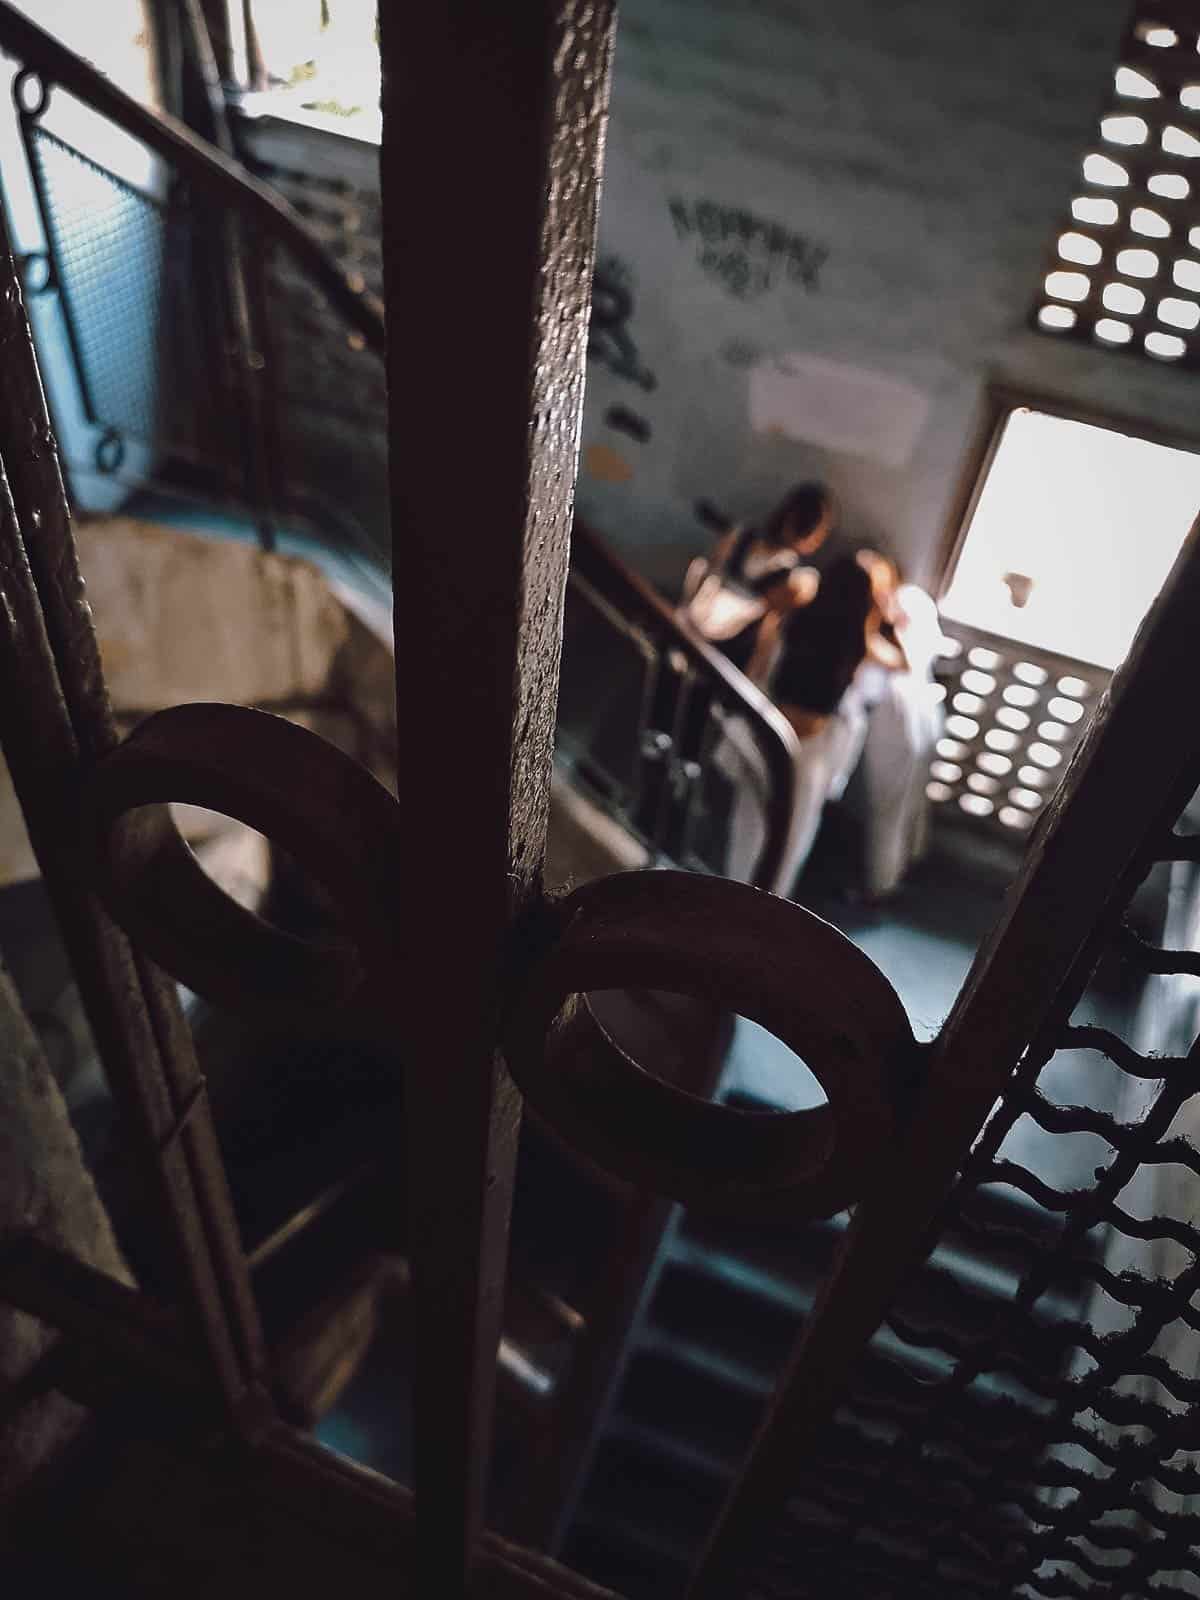 Stairwell inside the Ton That Dam building